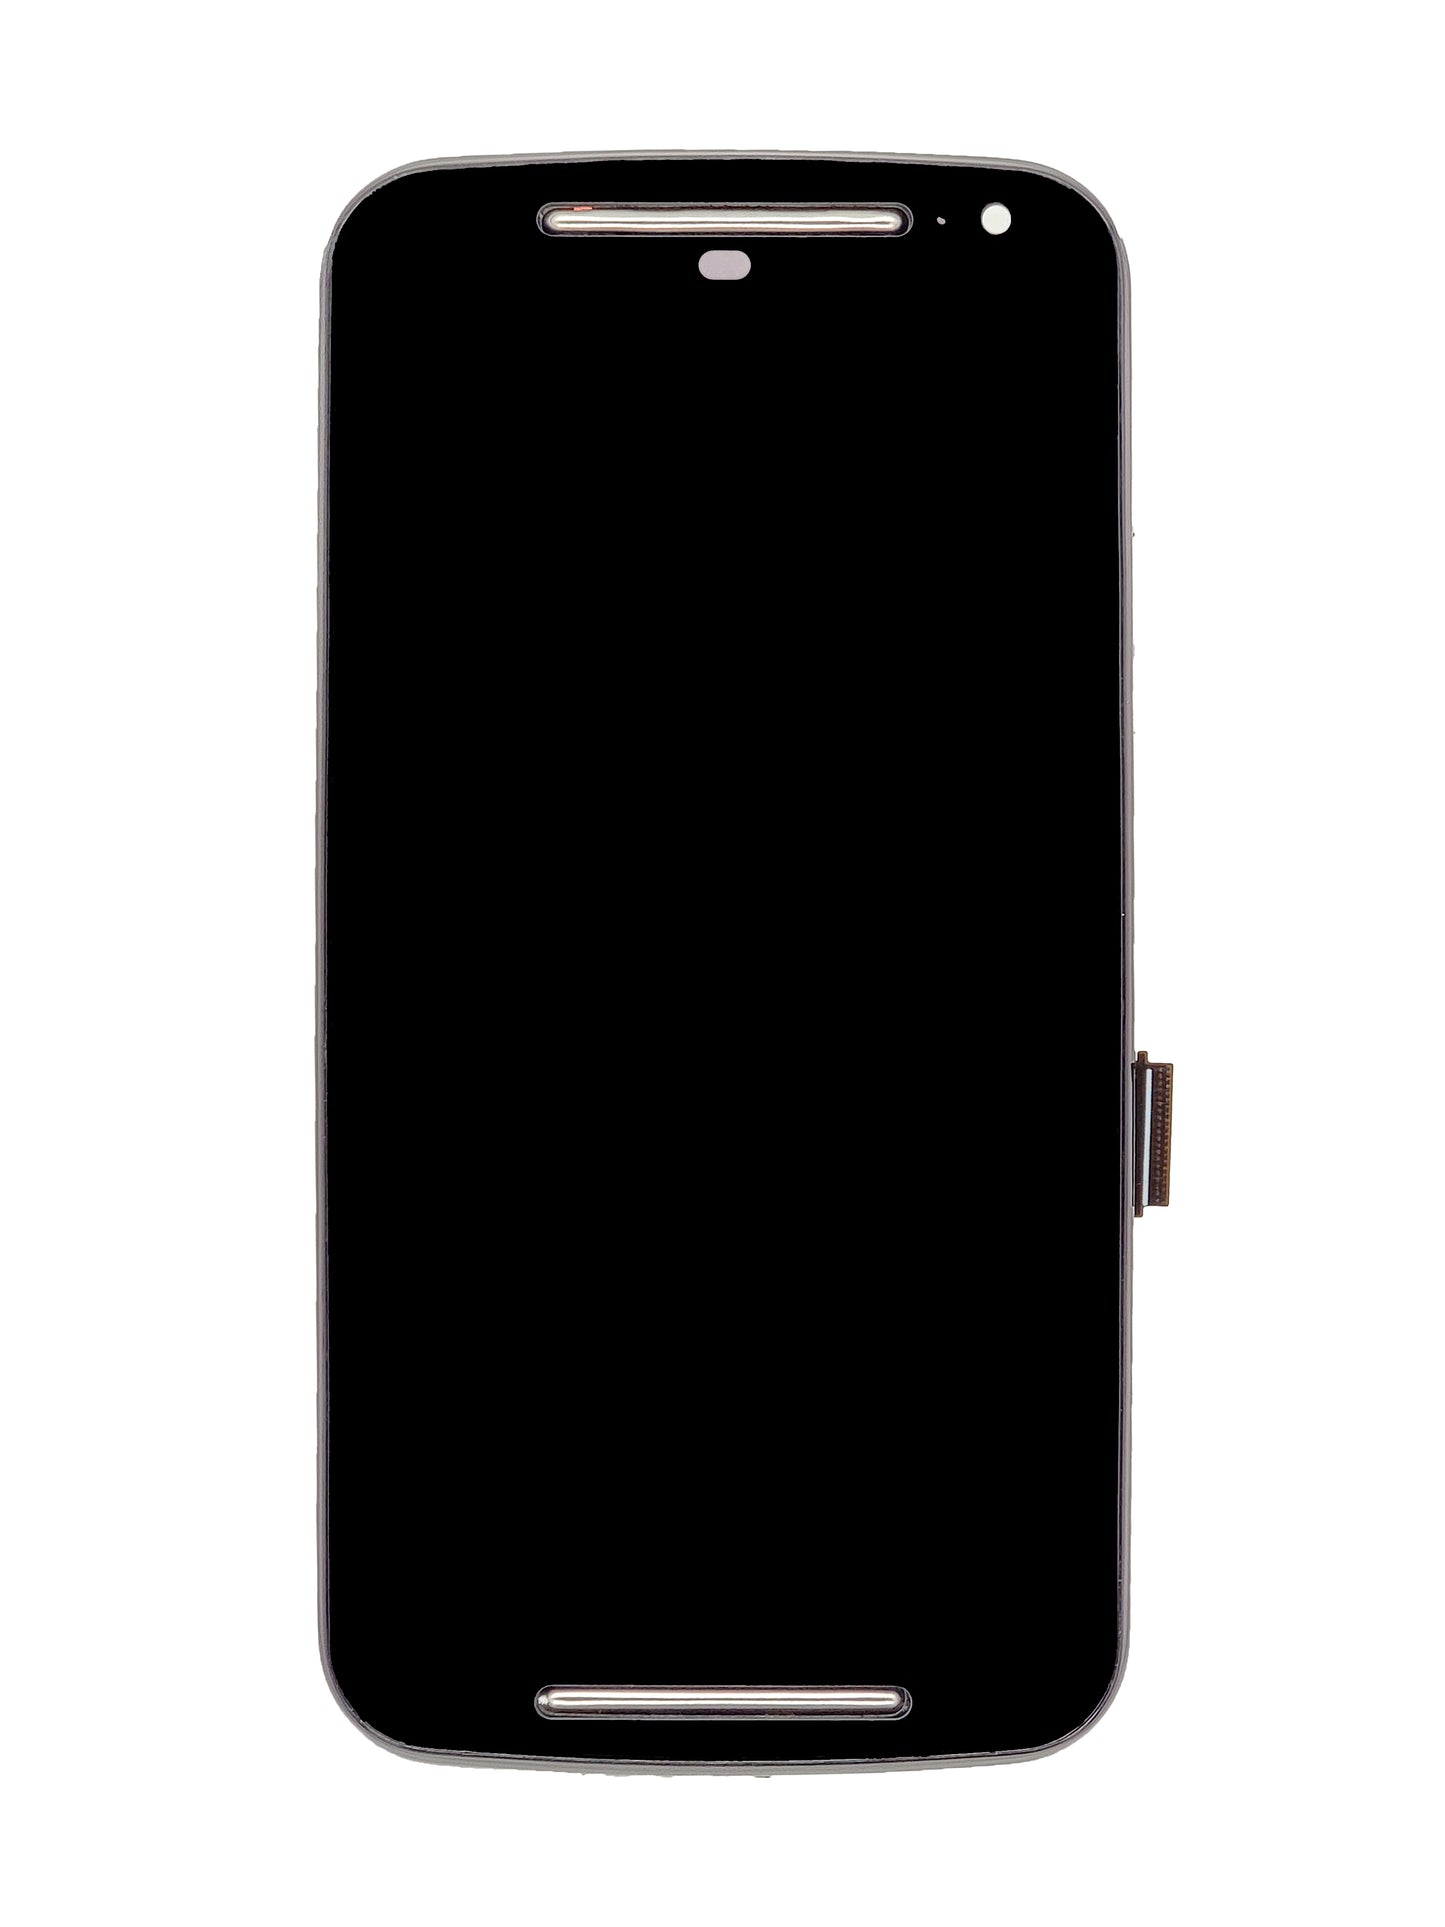 Moto G2 (XT1068) Screen Assembly (With The Frame) (Refurbished) (Black)